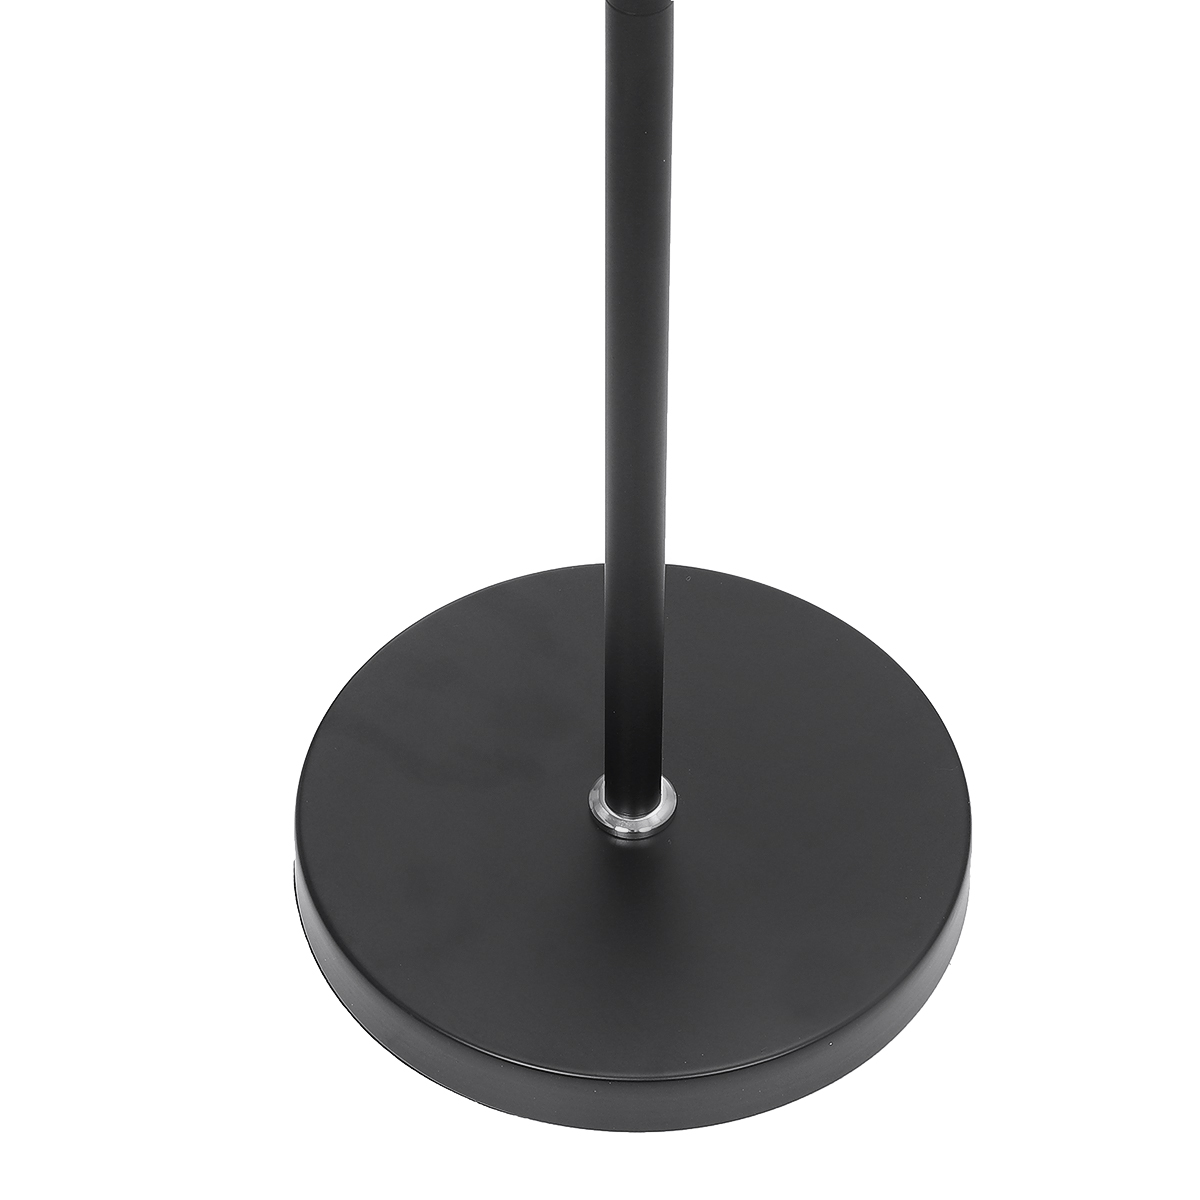 Find Modern LED Floor Lamp Stand Home Office Table Desk Reading Light Dimmable Home for Sale on Gipsybee.com with cryptocurrencies